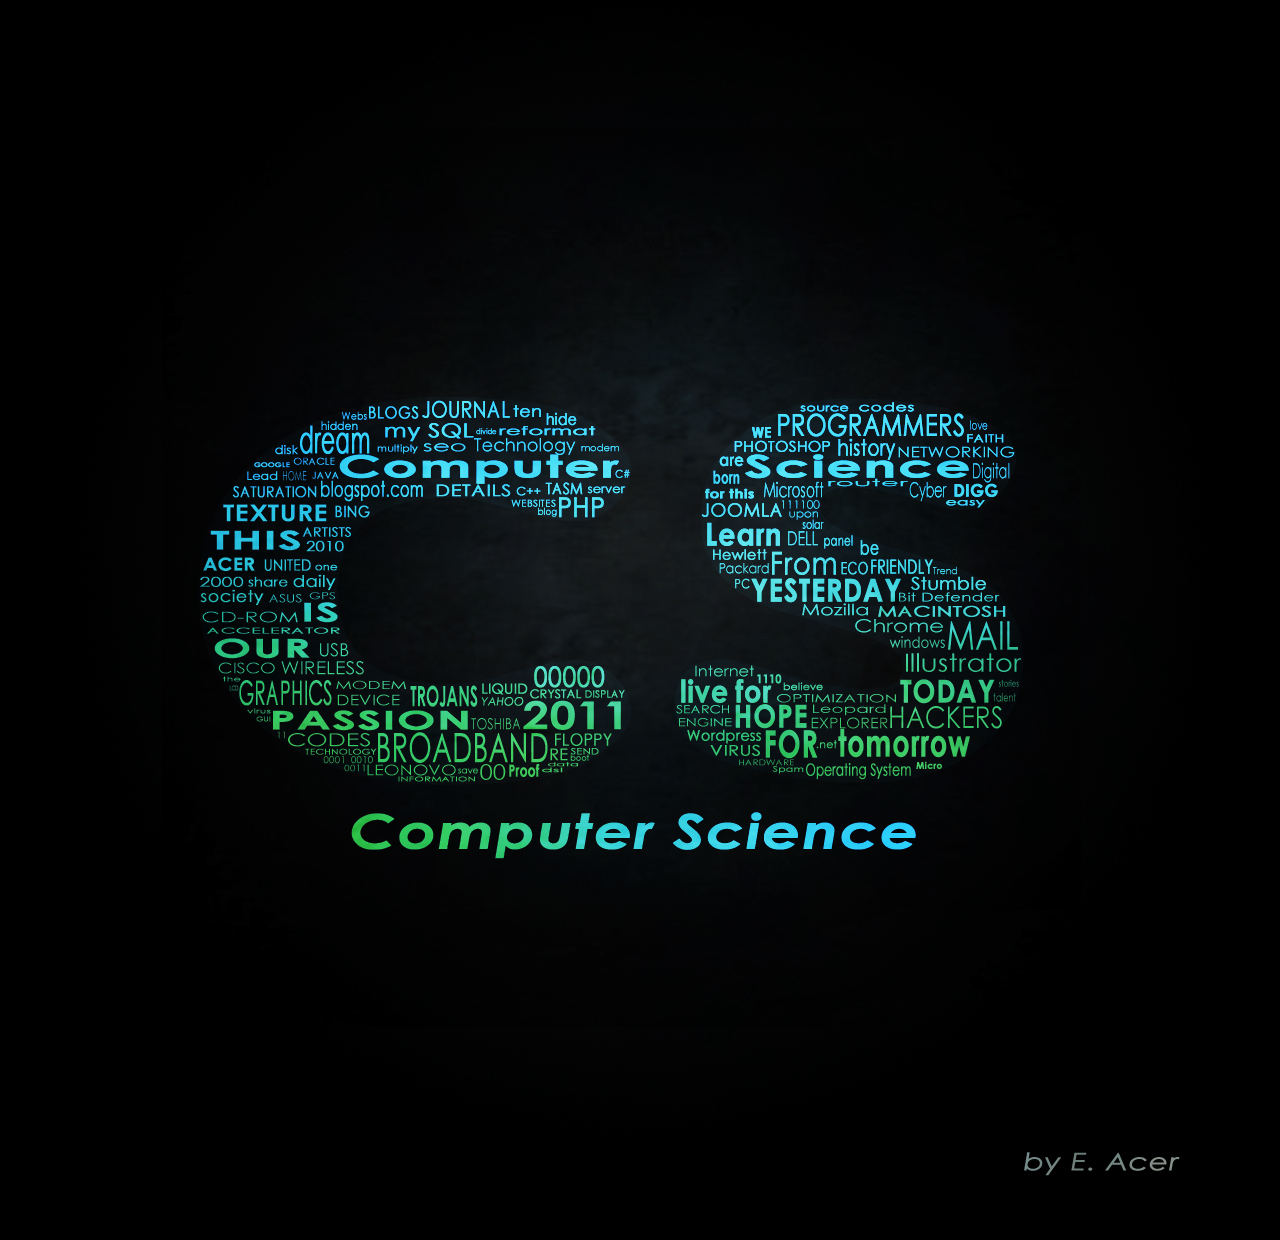 Computer Science course